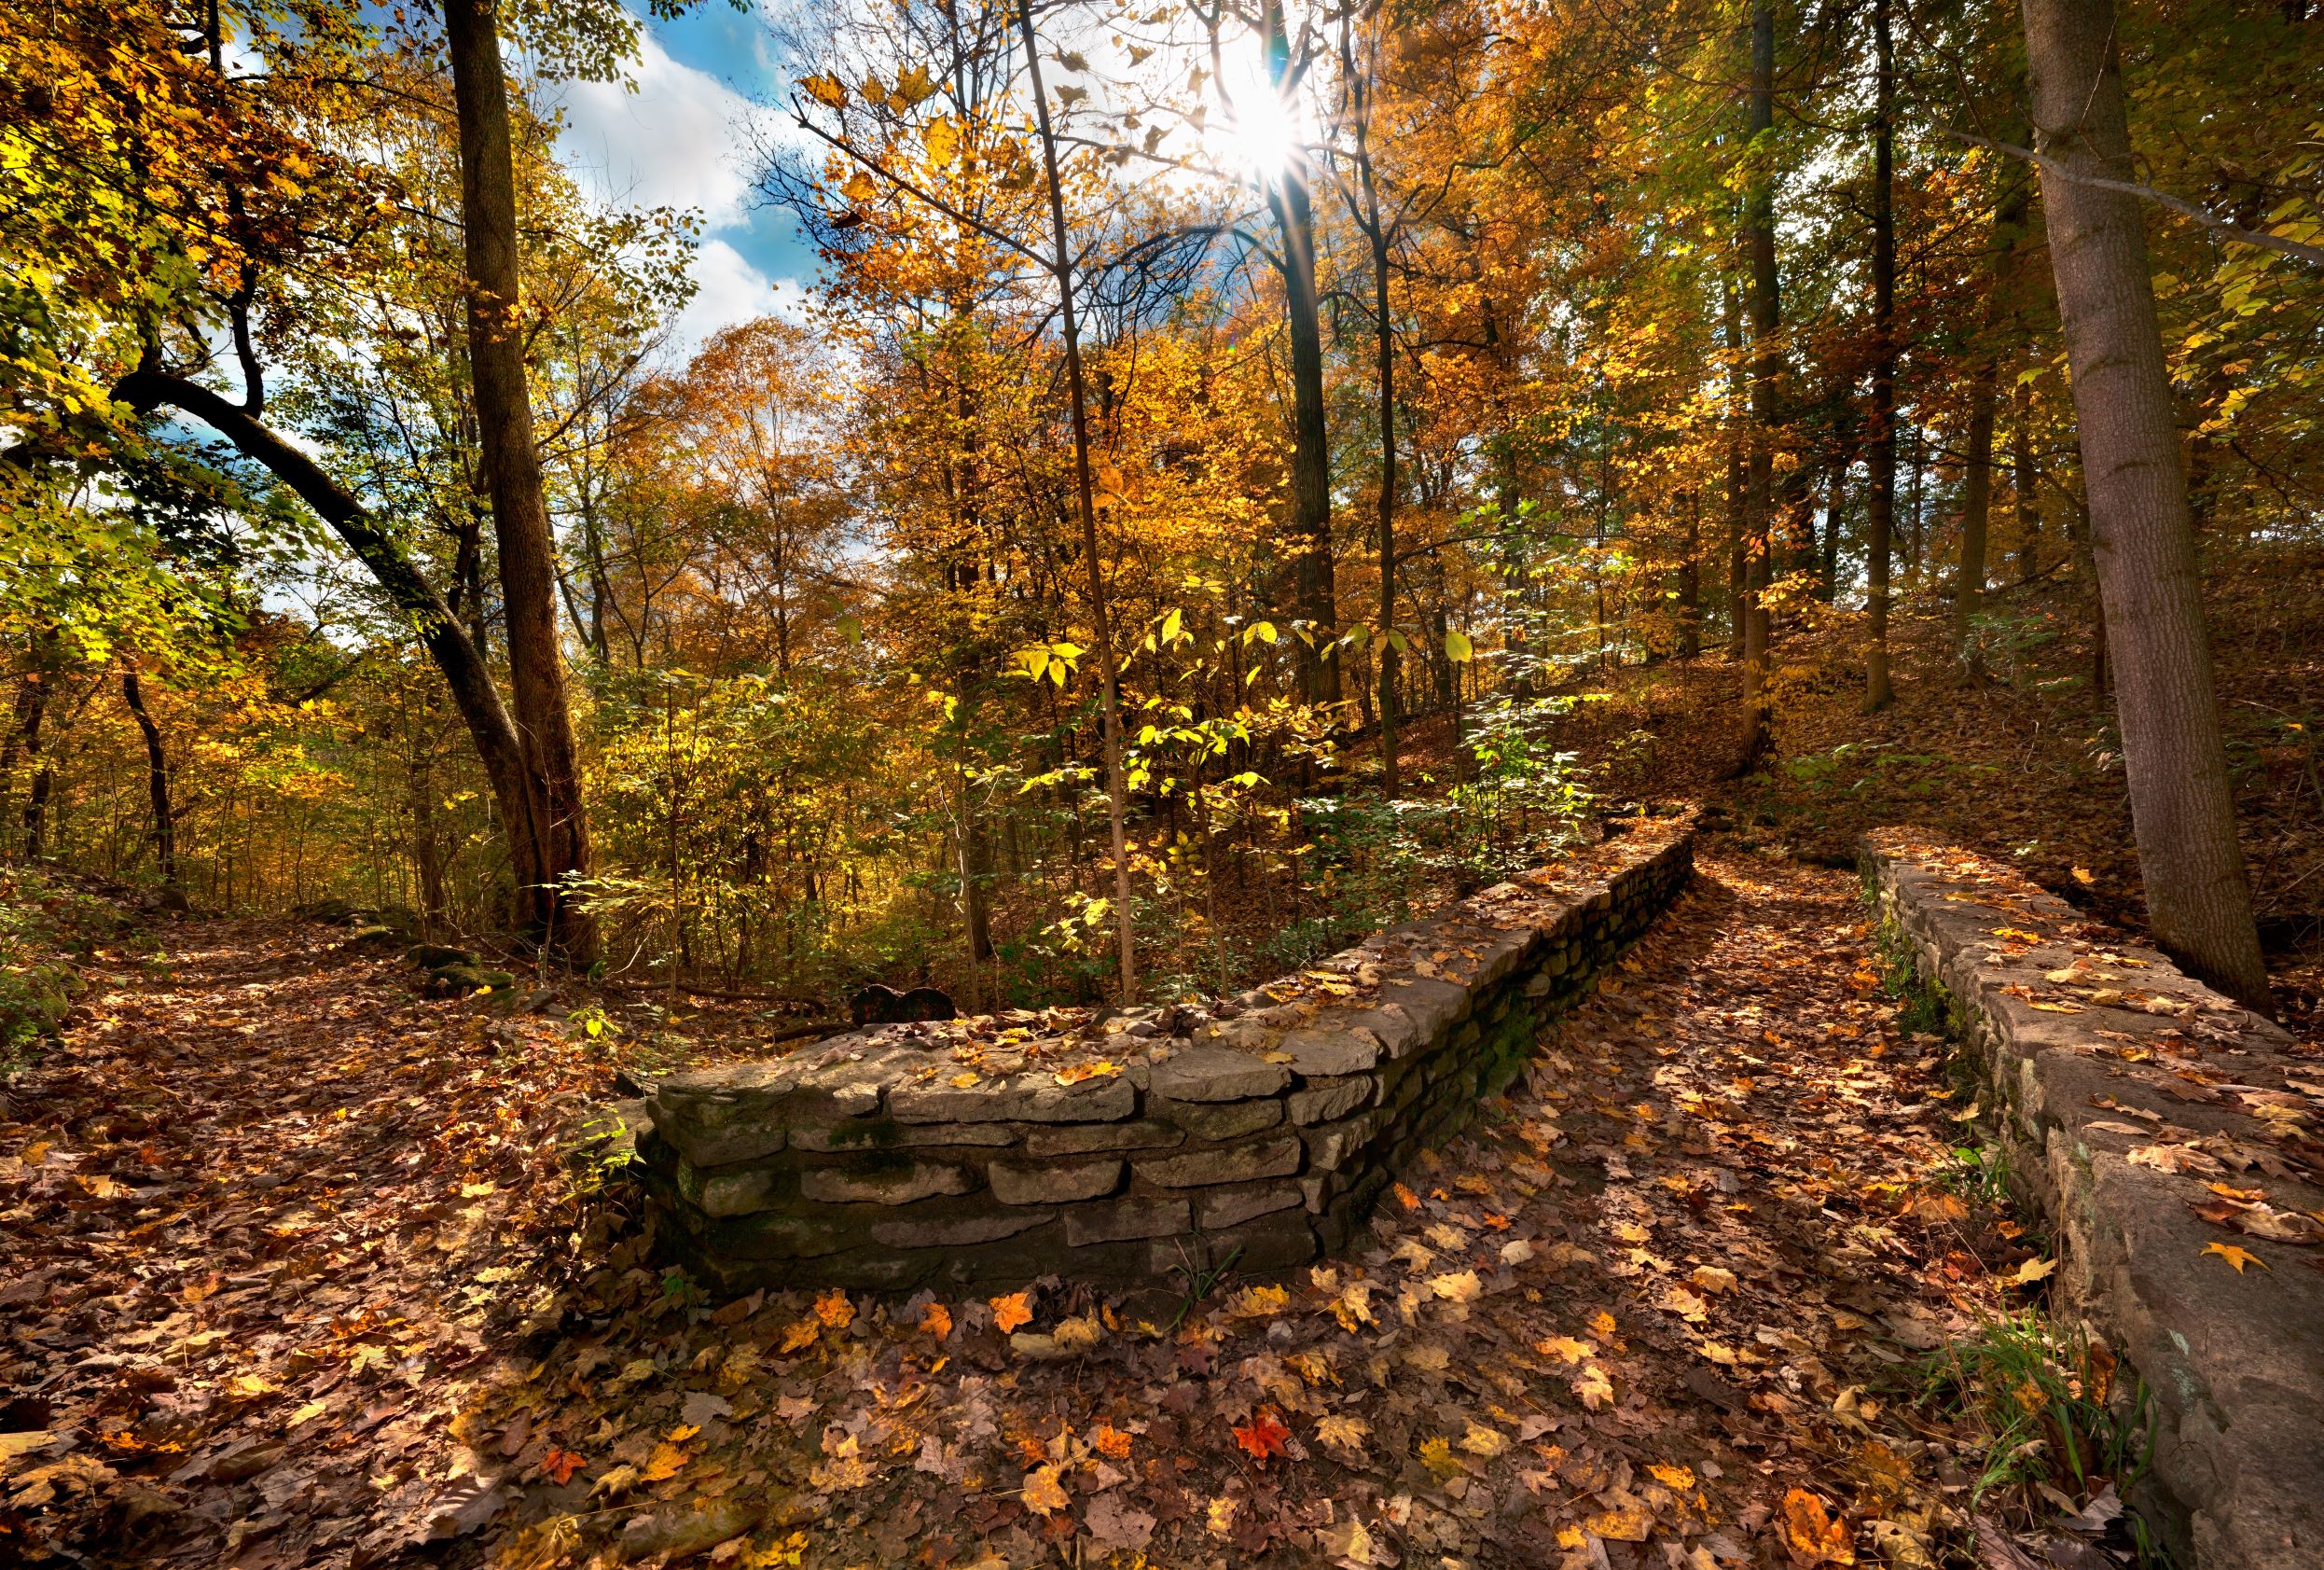 A stone wall along a trail in fall